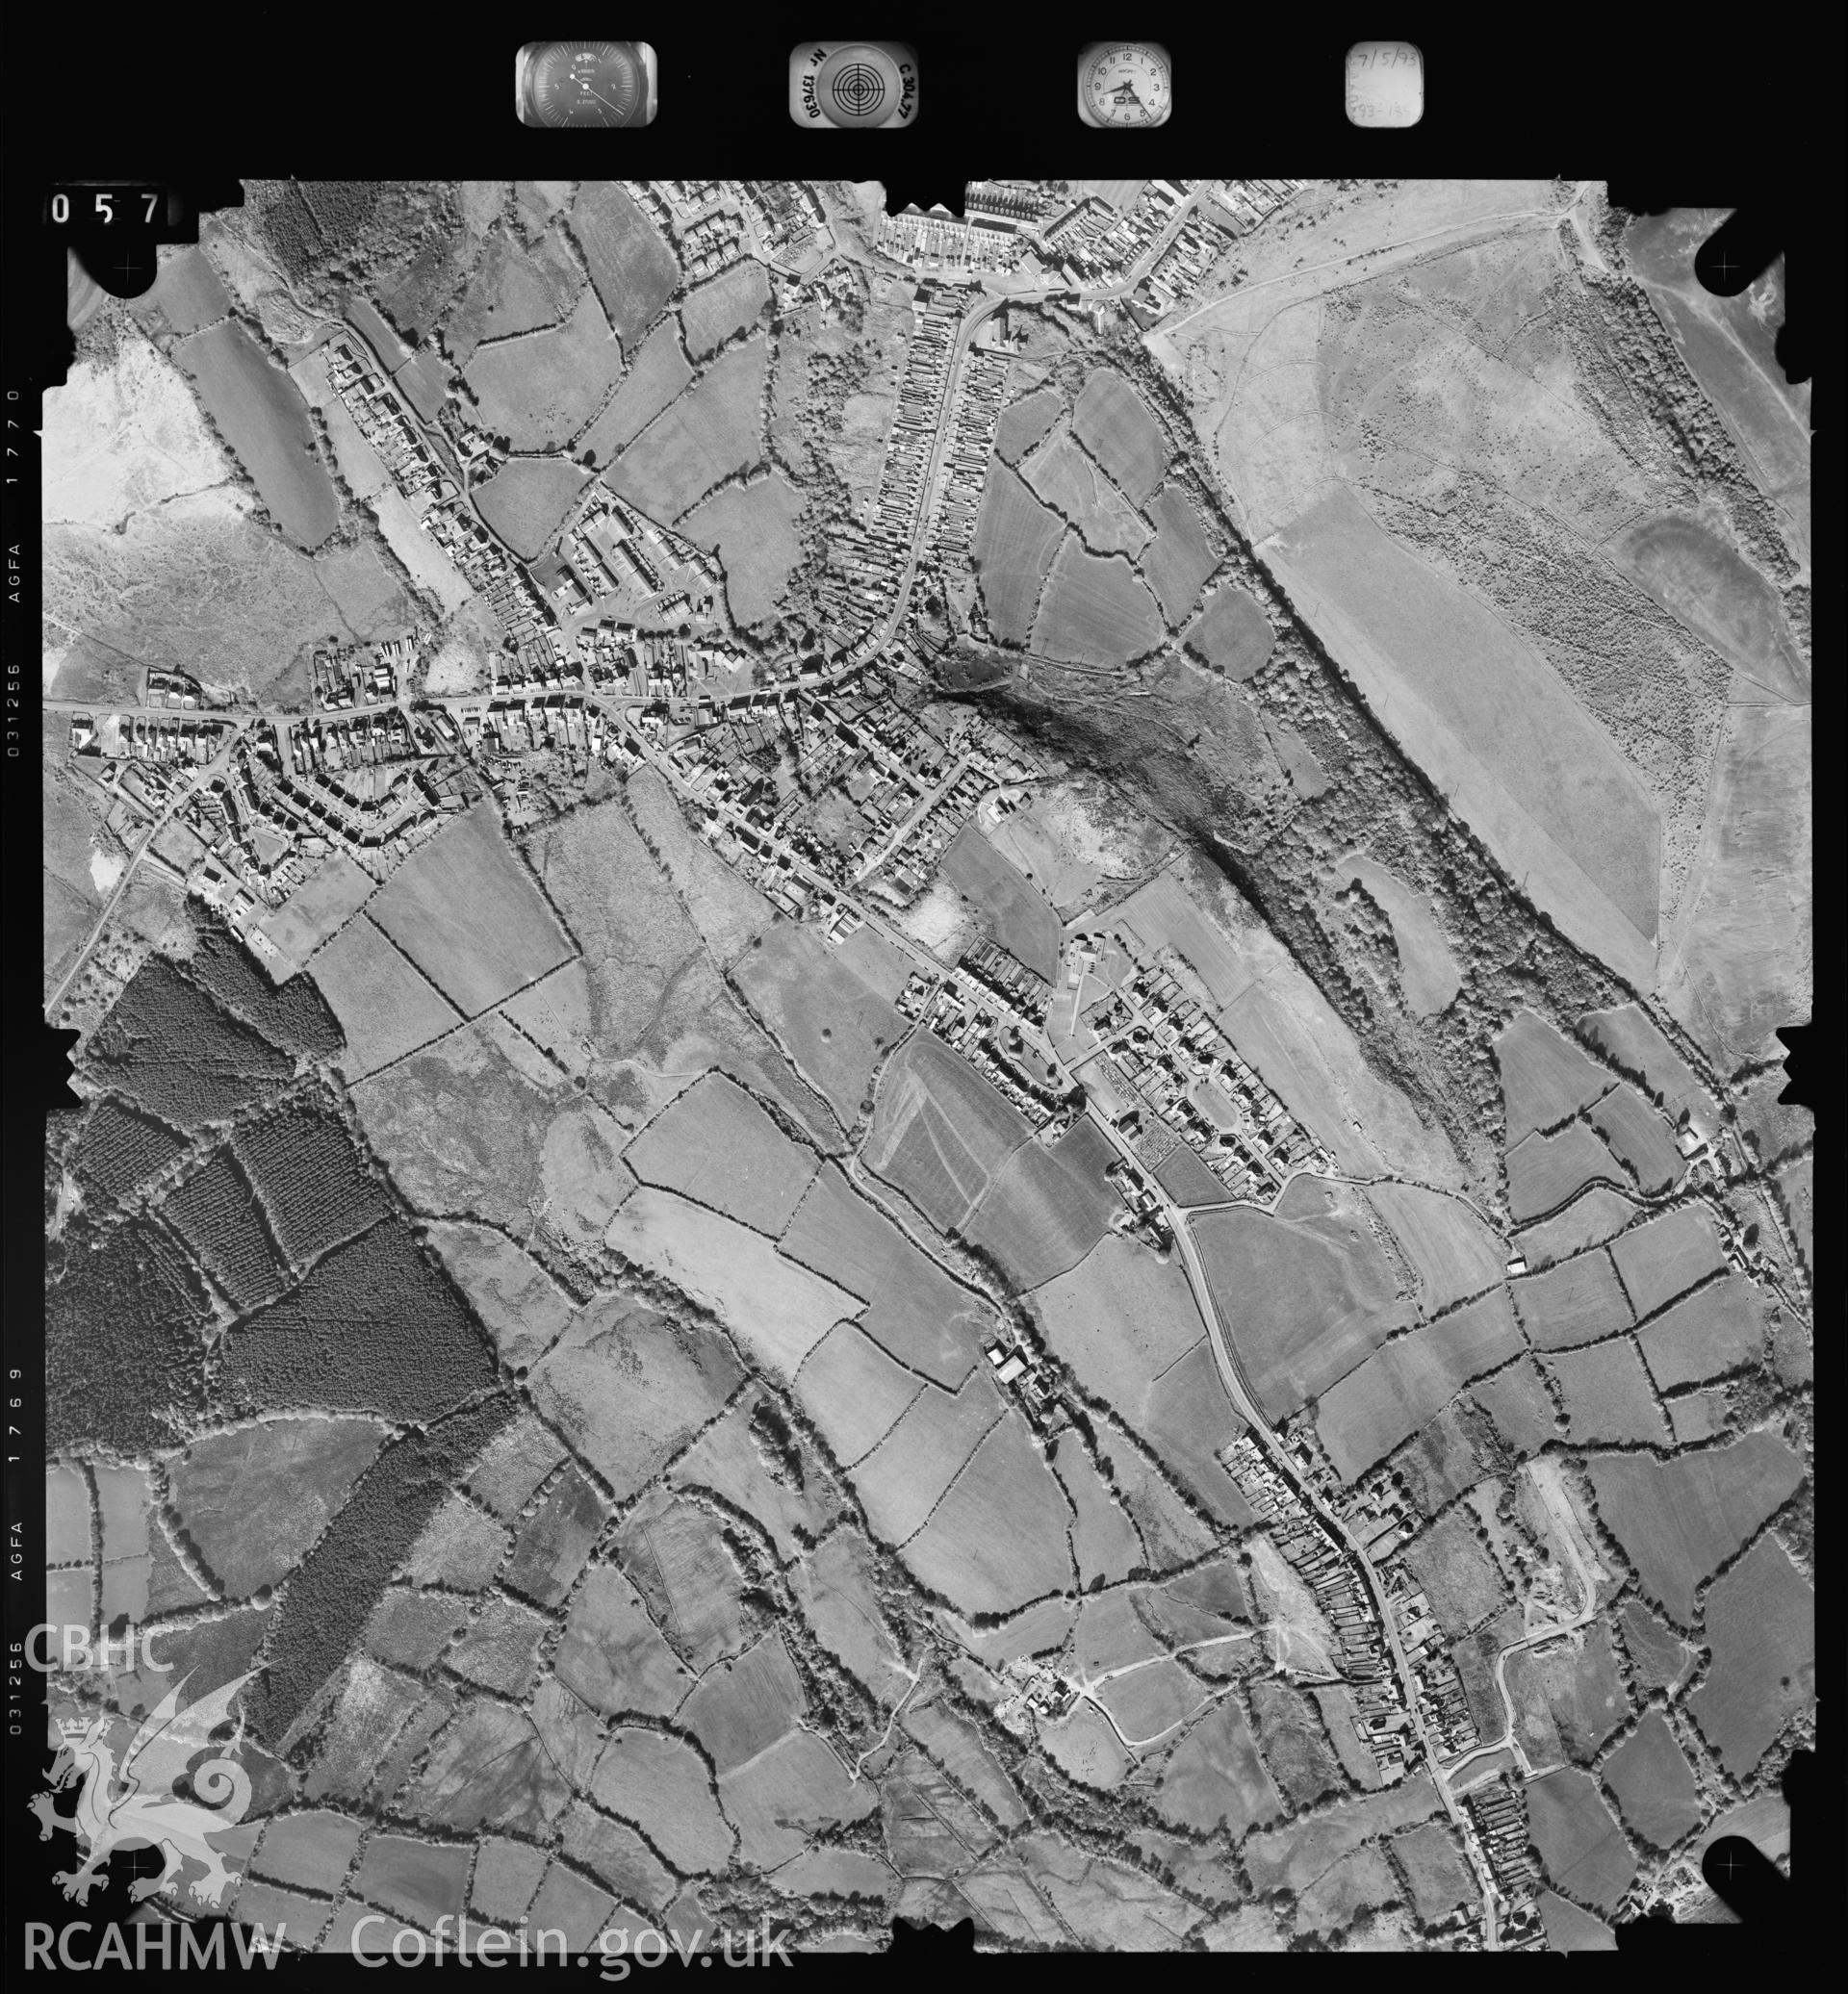 Digitized copy of an aerial photograph showing the Tumble area, taken by Ordnance Survey, 1993.